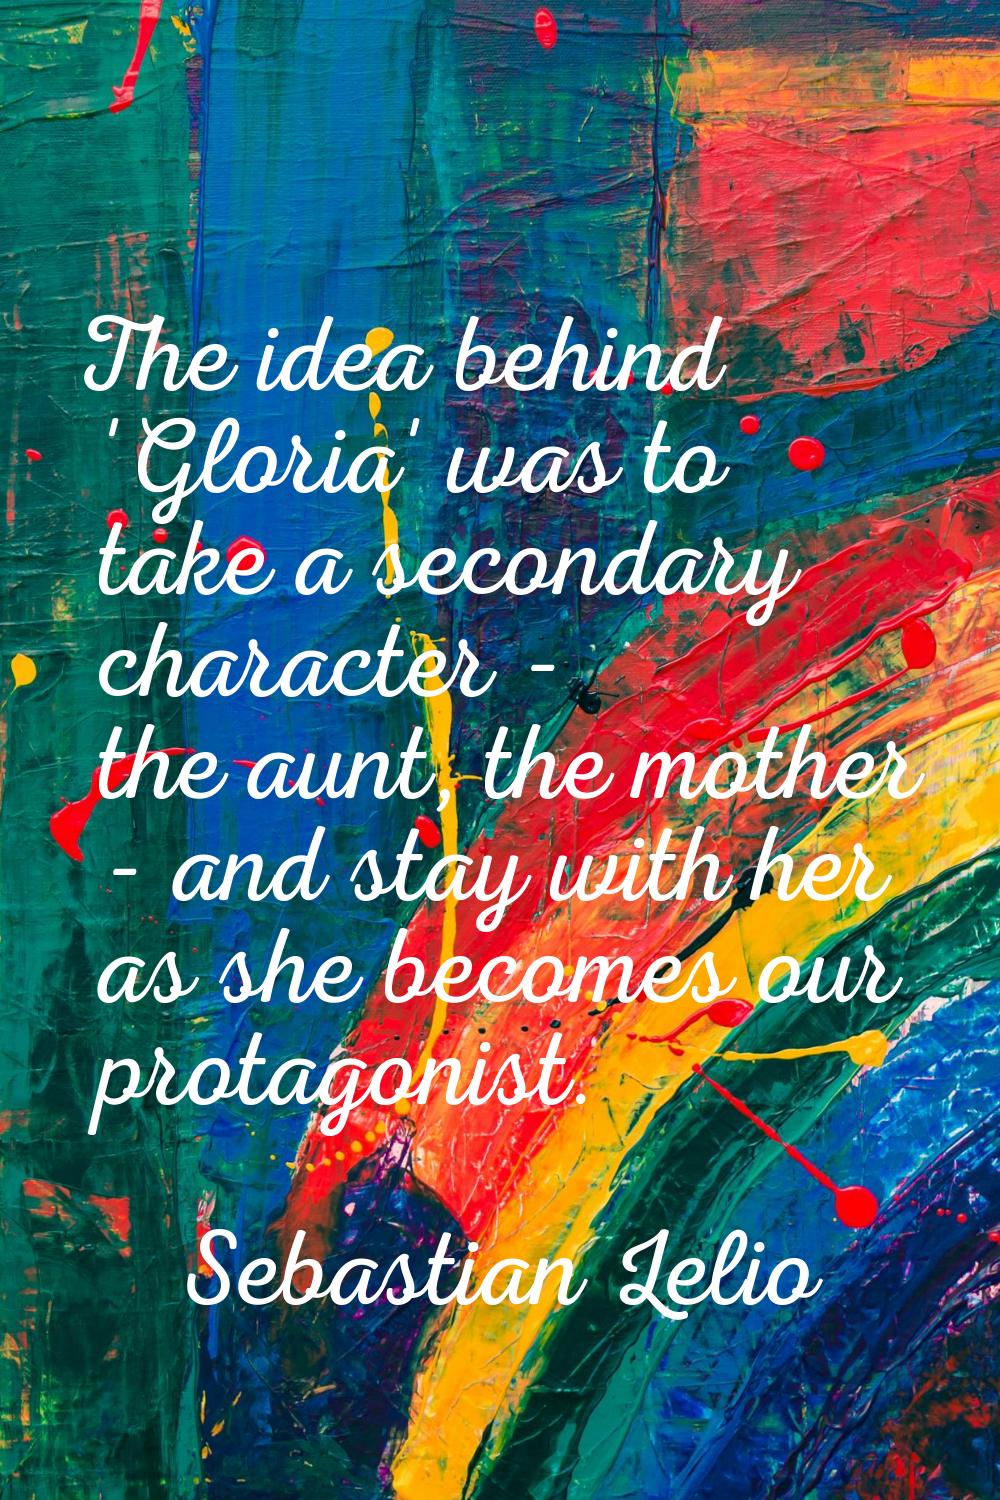 The idea behind 'Gloria' was to take a secondary character - the aunt, the mother - and stay with h